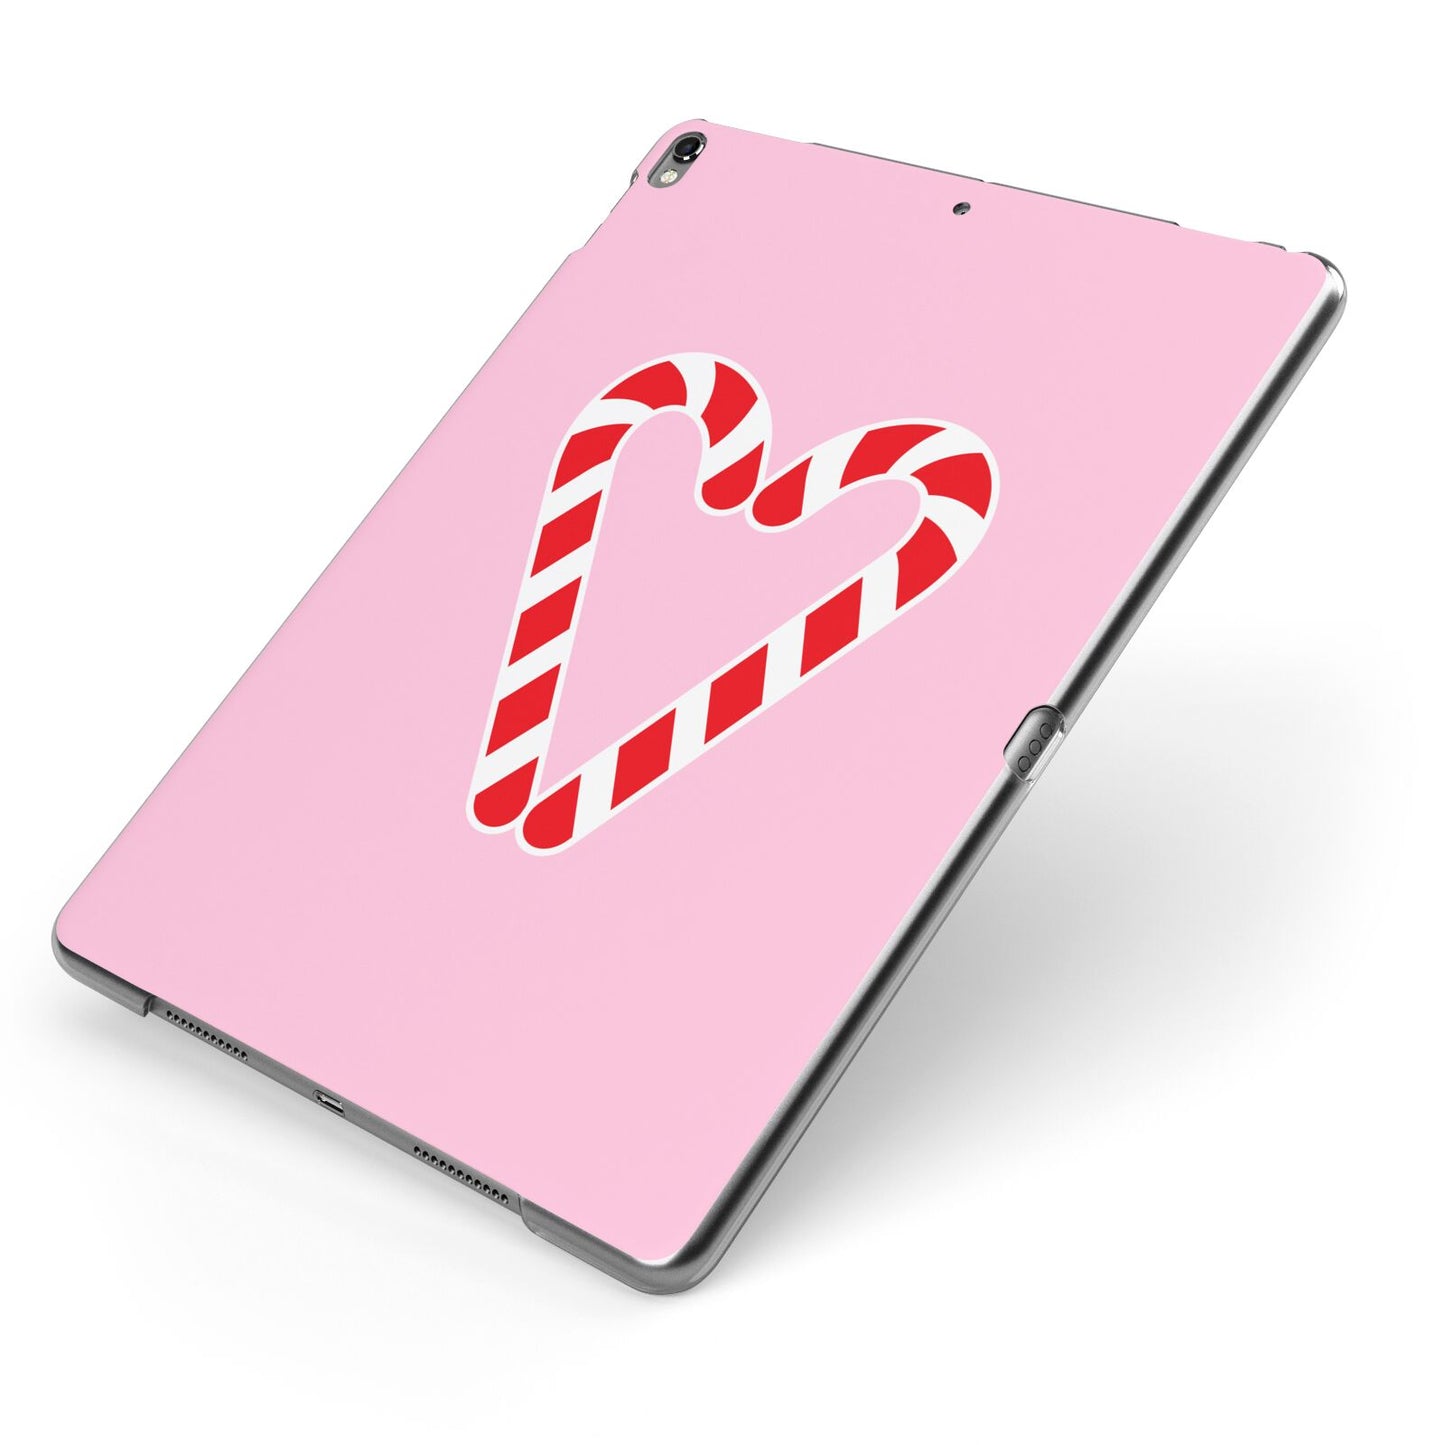 Candy Cane Heart Apple iPad Case on Grey iPad Side View